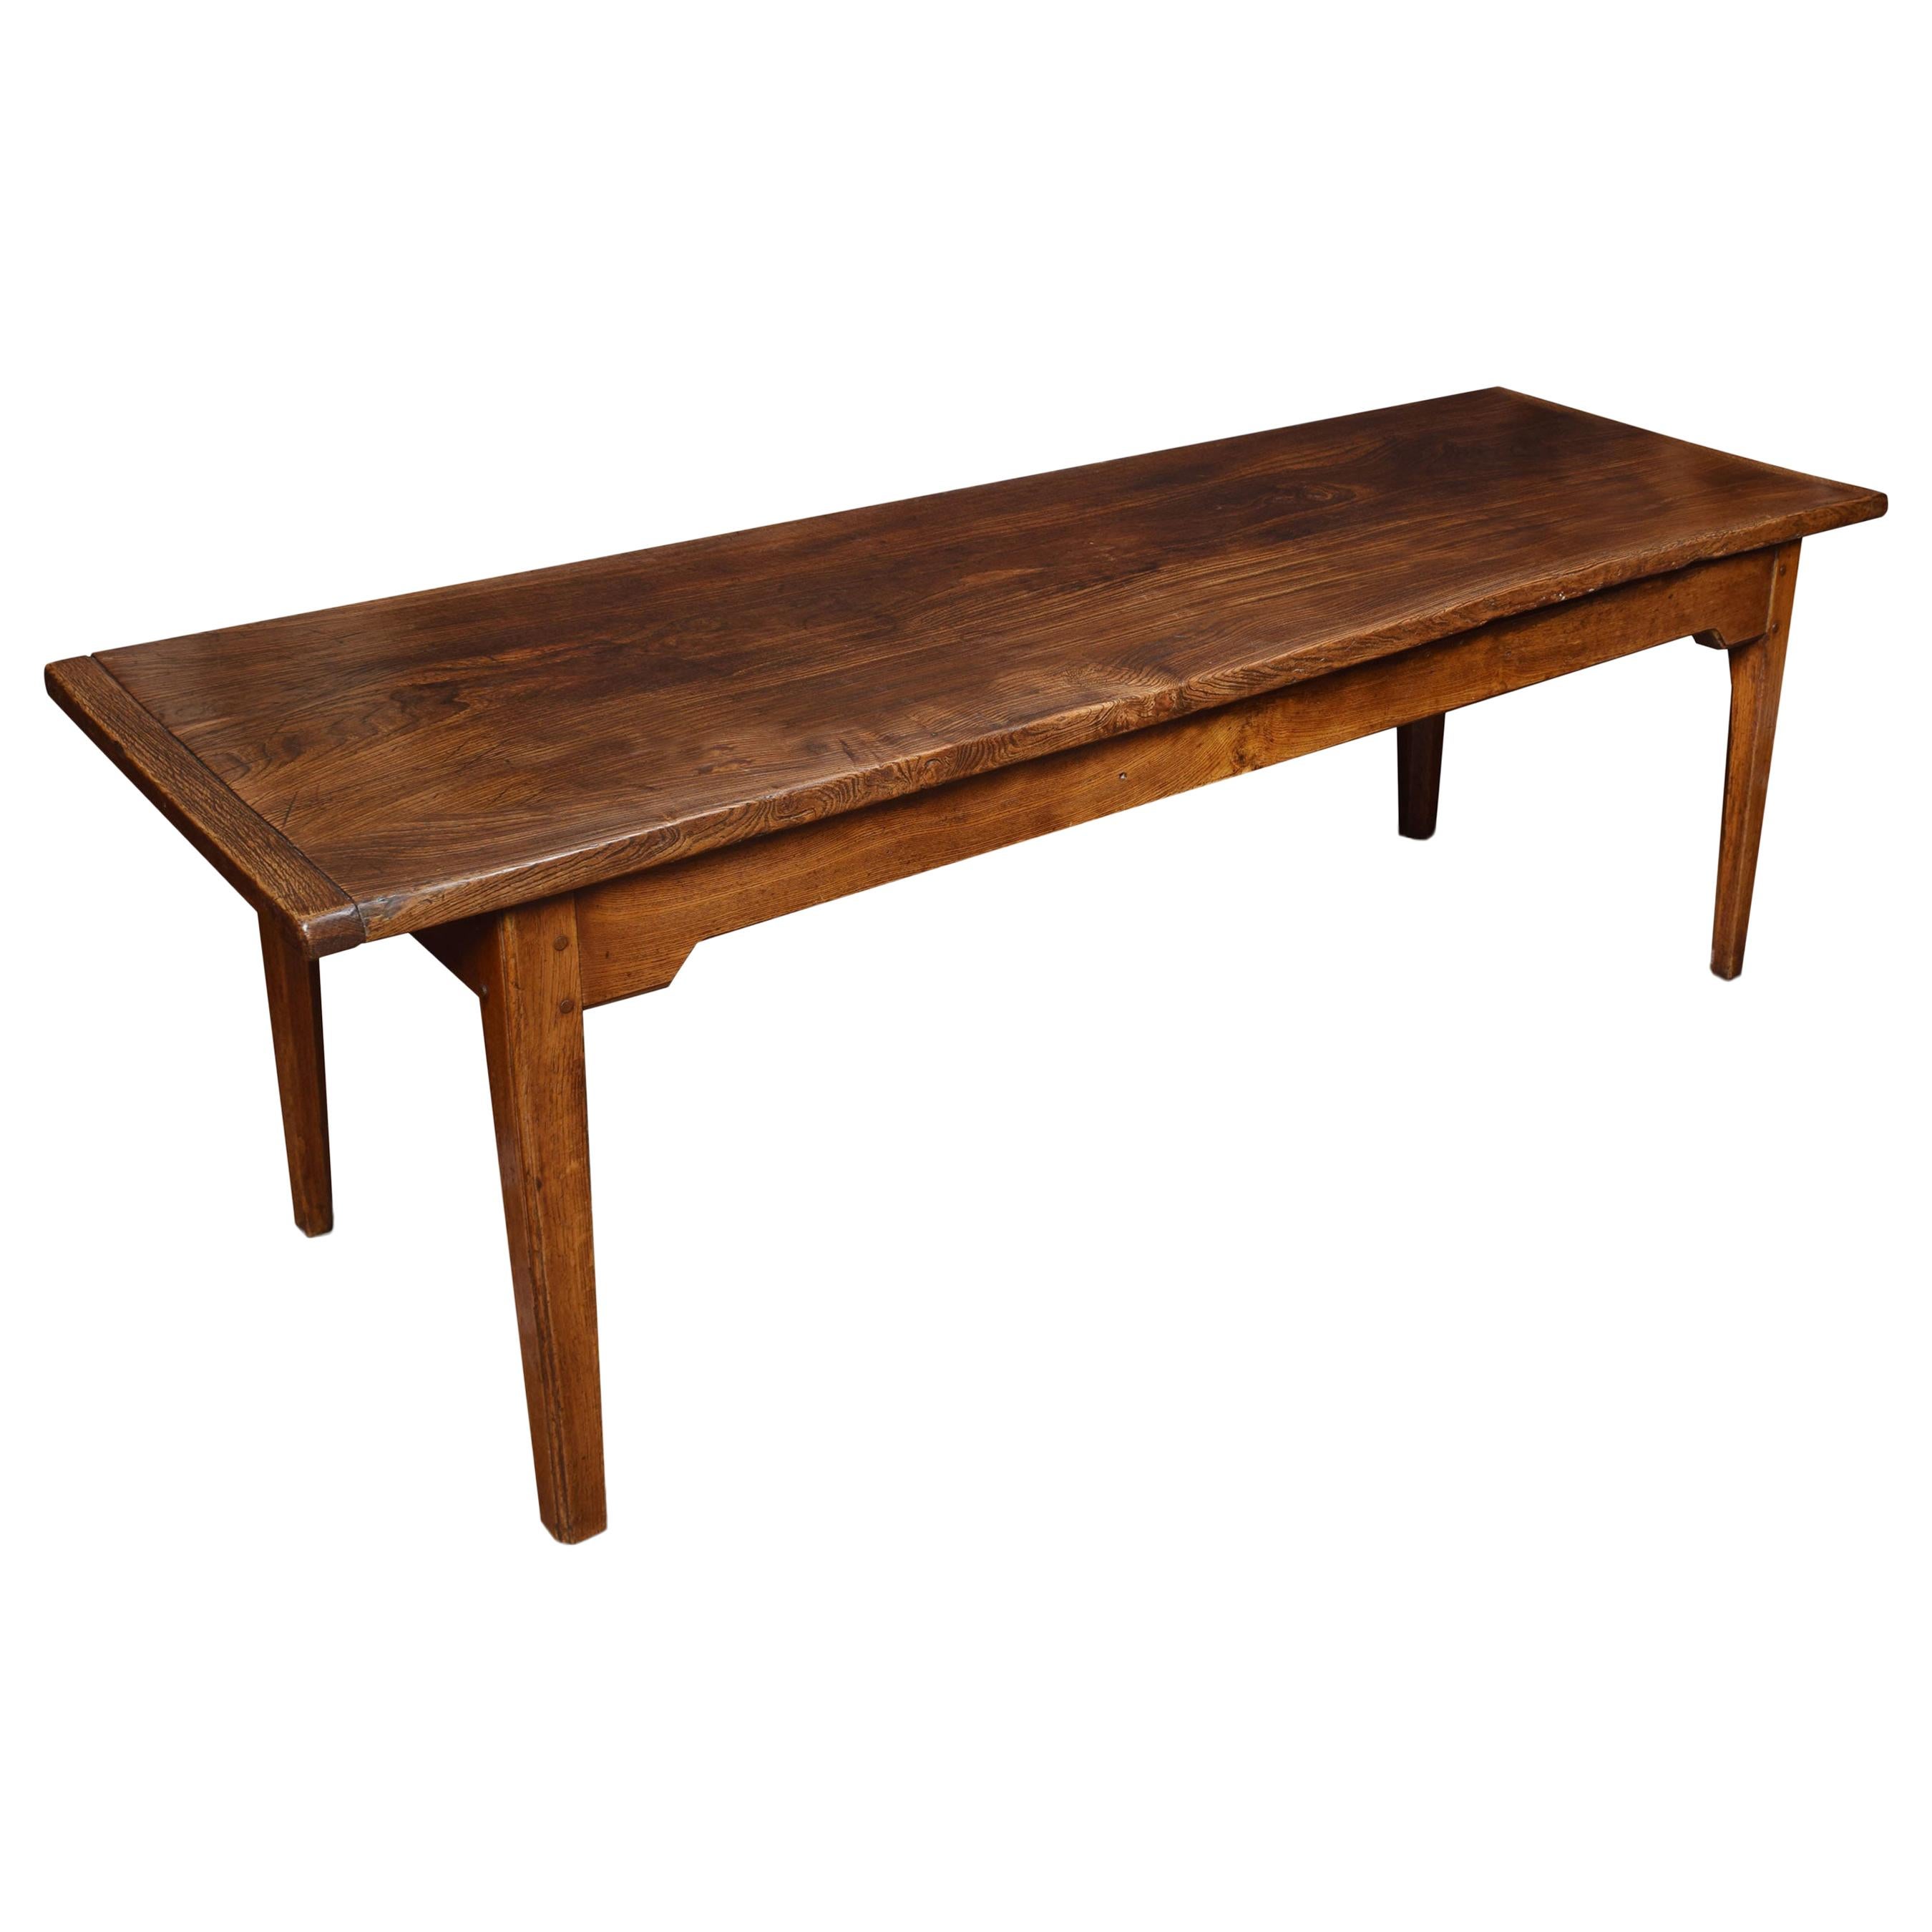 Elm Plank Top Refectory Table